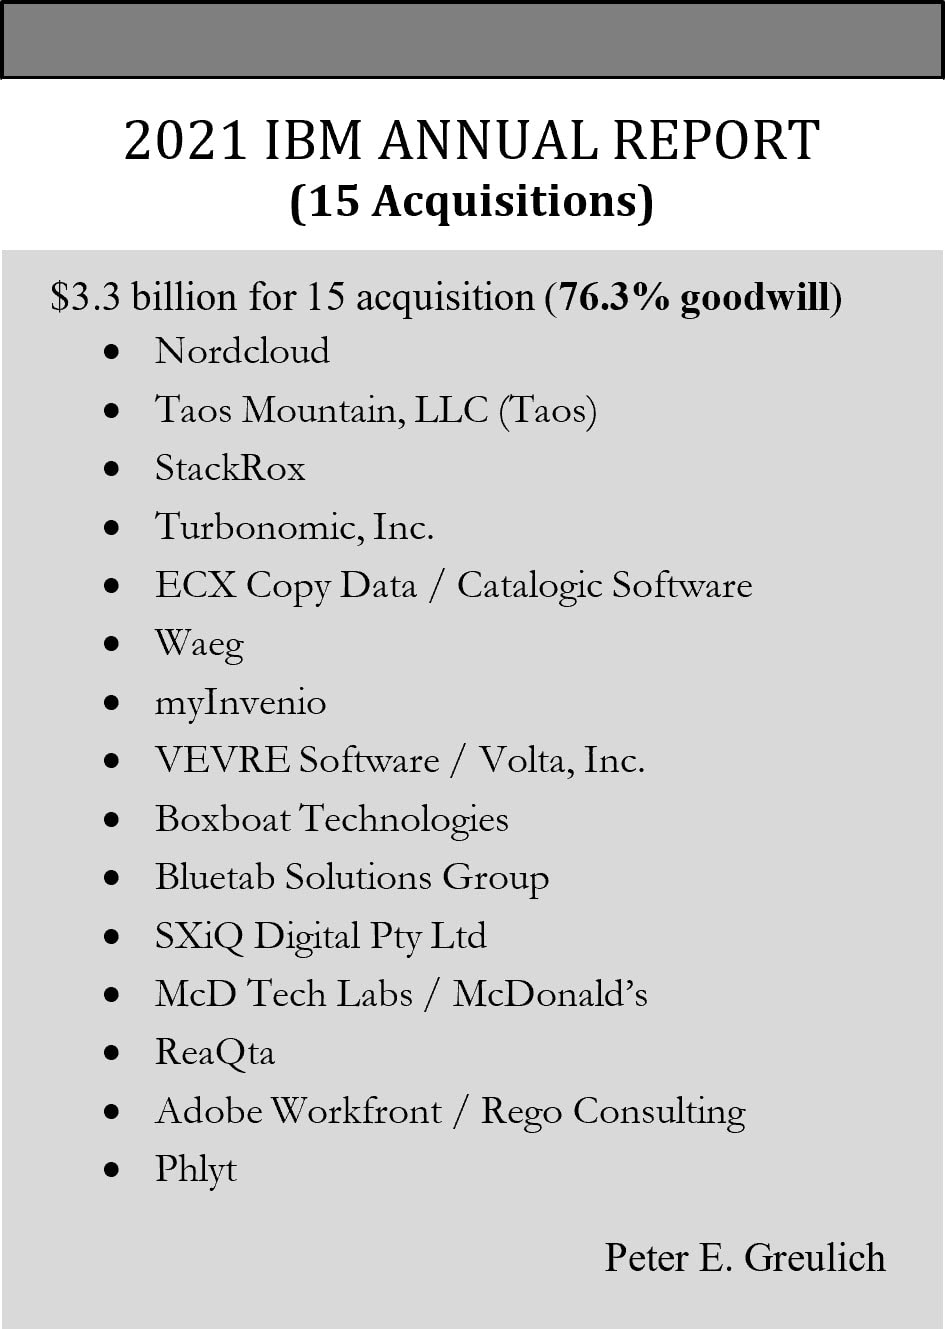 An image listing IBM's fifteen acquisitions in 2021, the total amount paid, and total percentage of goodwill.